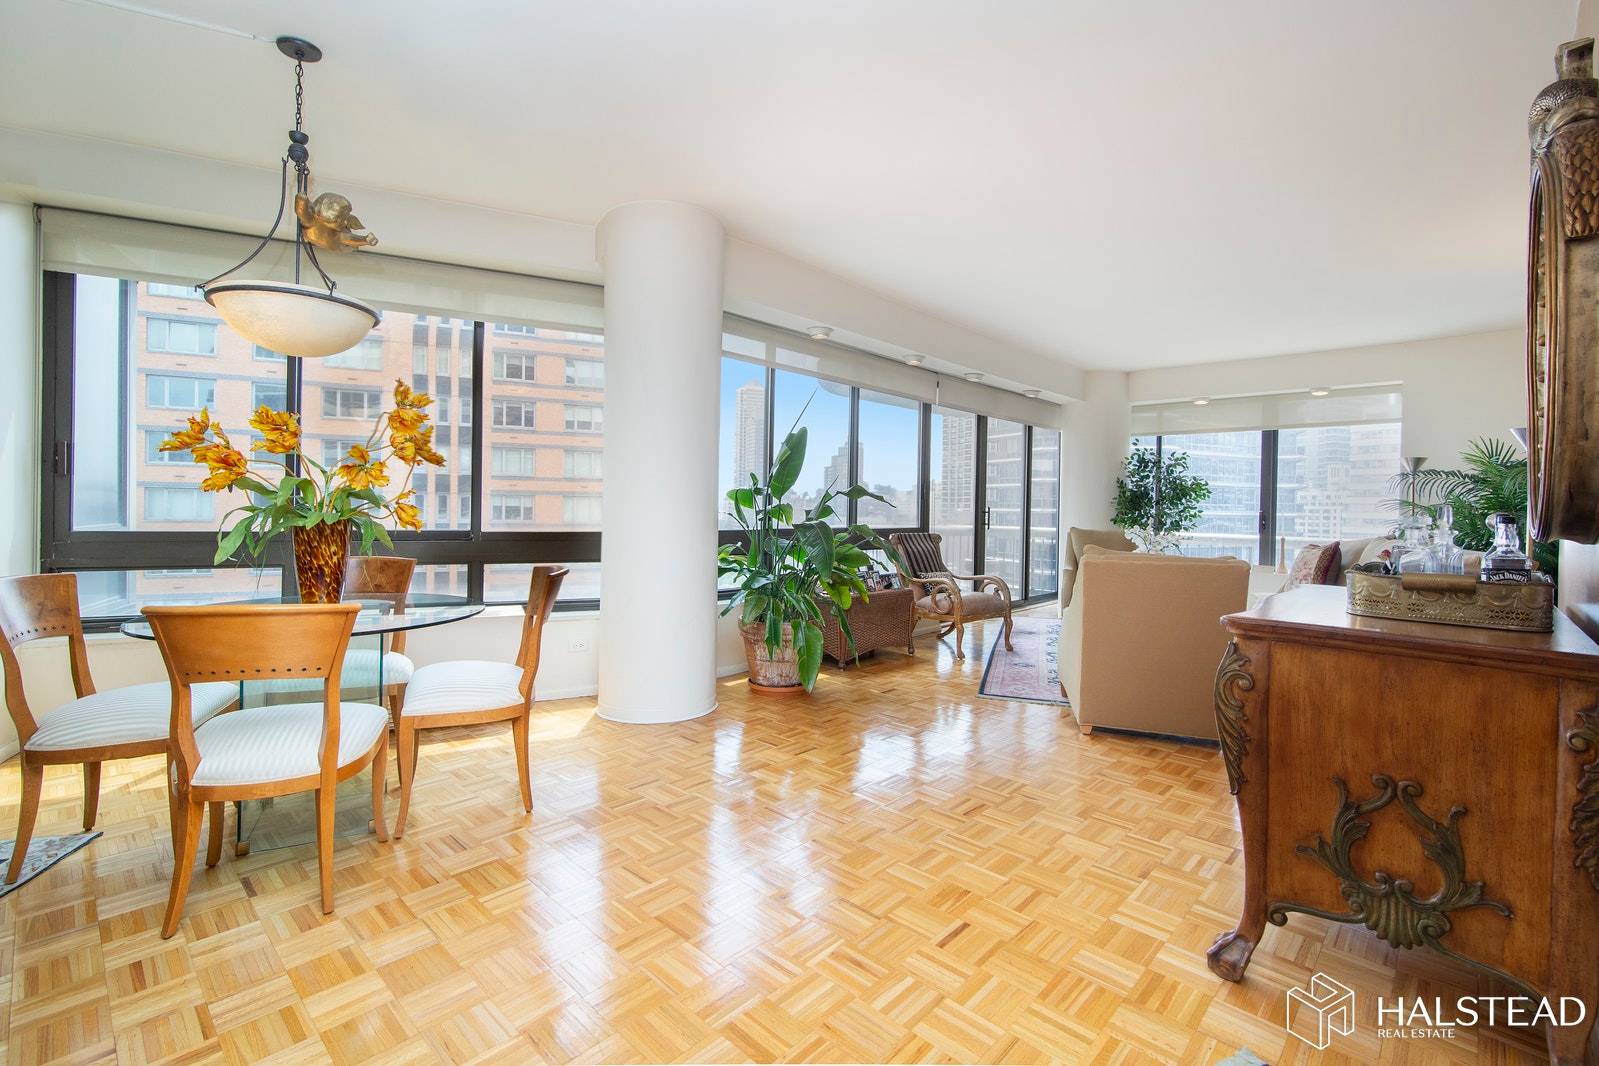 Charming 2 Bedroom 2. 5 Baths with Wrap Terrace and Exciting South East City Views.